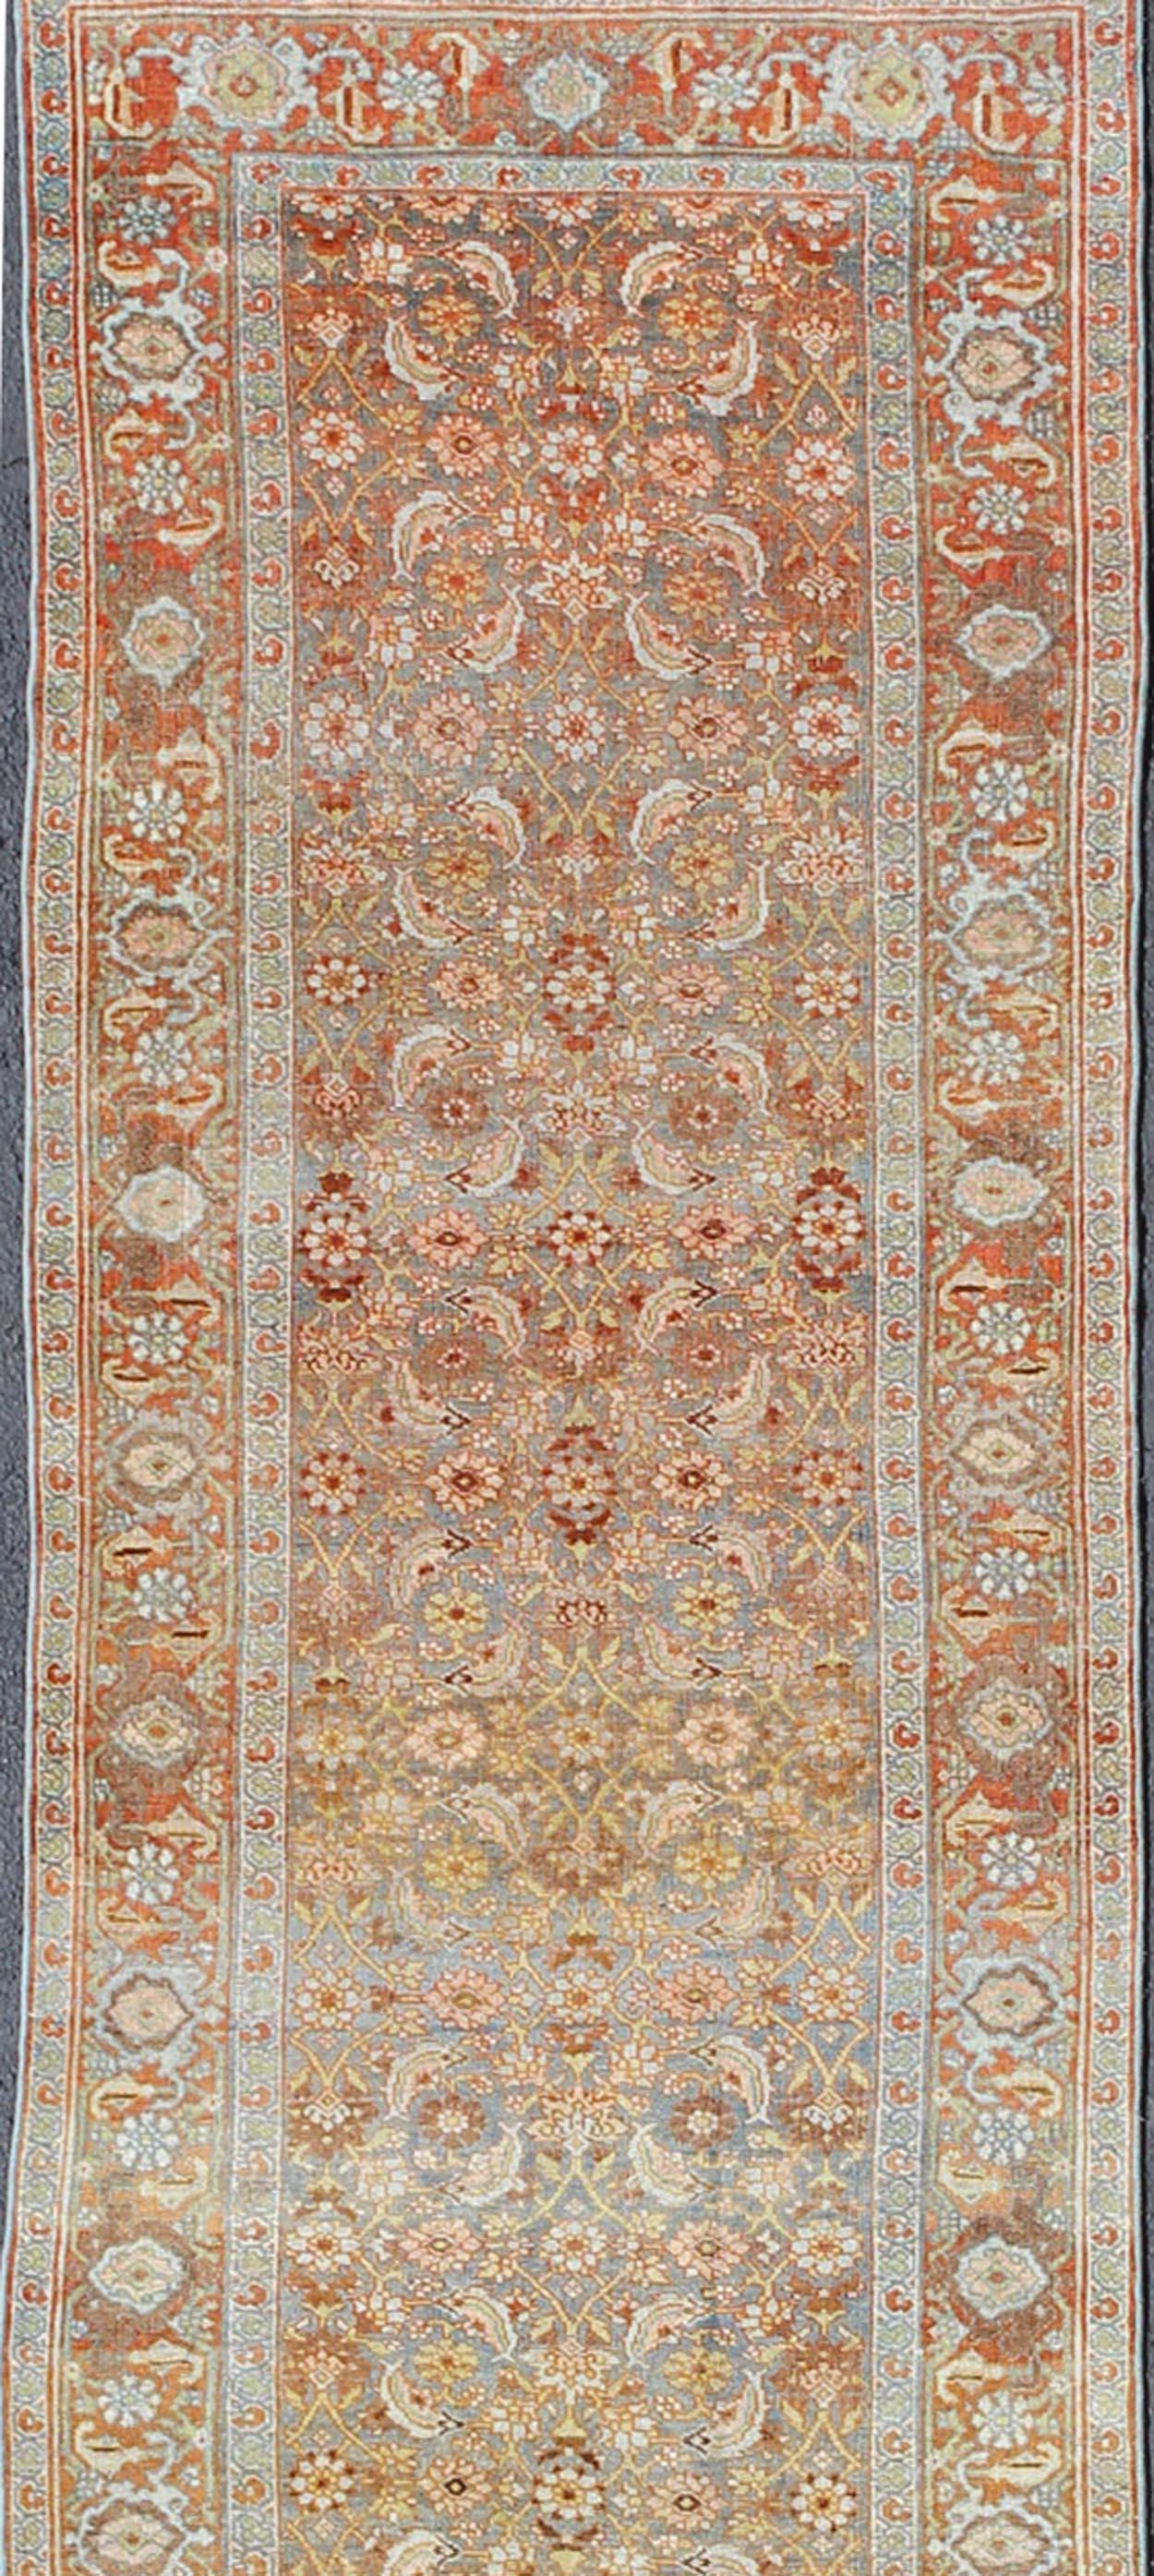 Wool Antique Persian Bidjar Rug with Blossoming Floral Design in Light Blue and Red For Sale